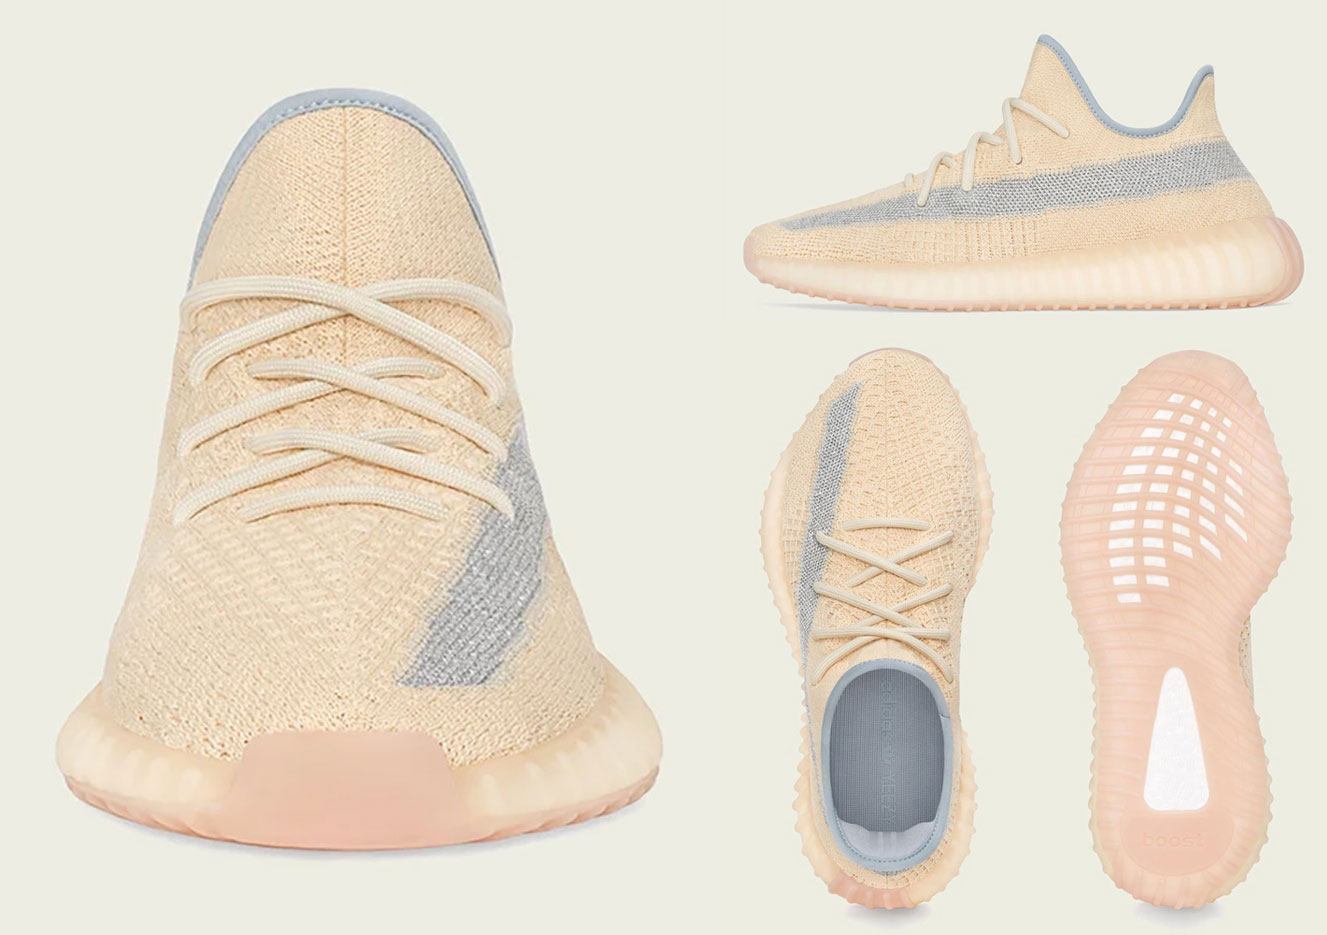 yeezy-boost-350-v2-linen-adidas-outfits